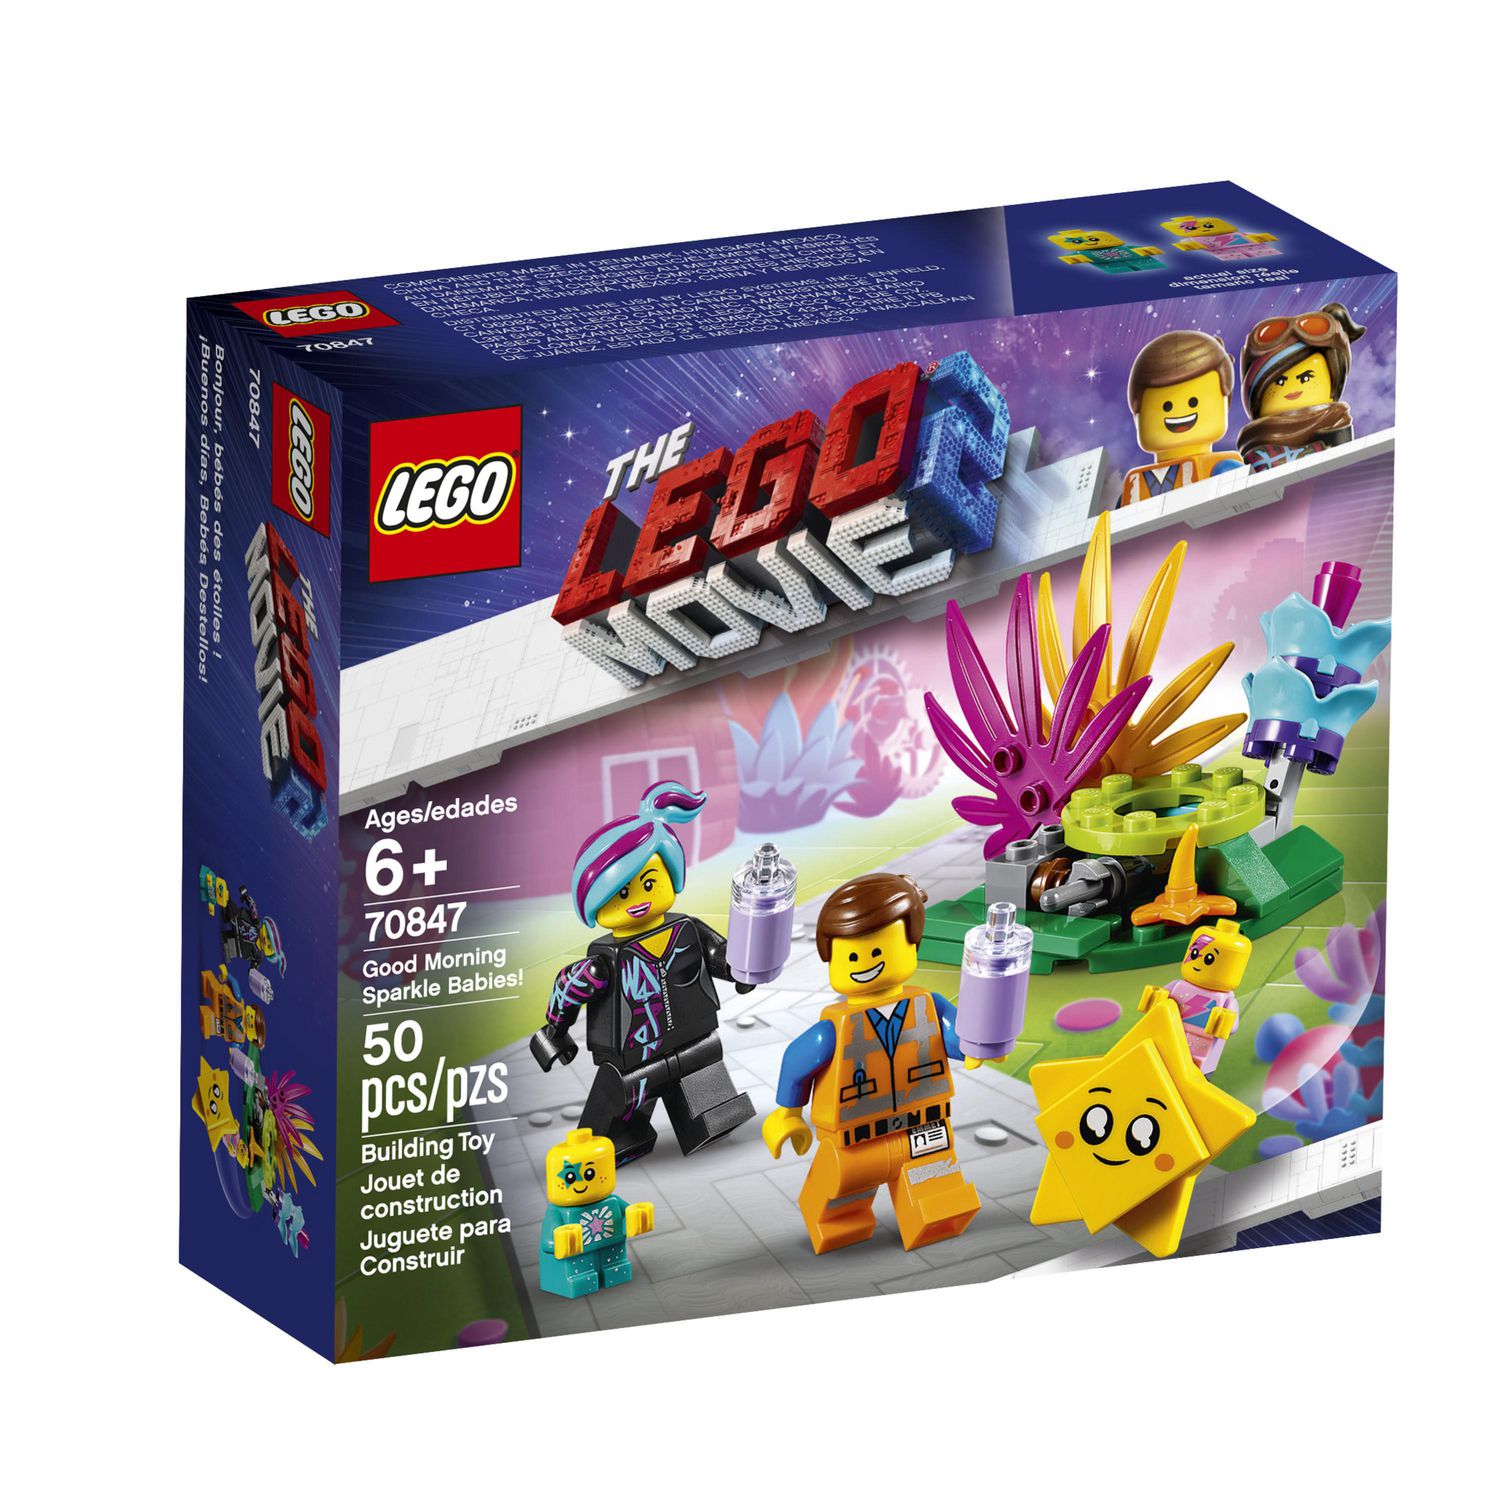 THE LEGO MOVIE 2 Good Morning Sparkle Babies! 70847 Toy Building 